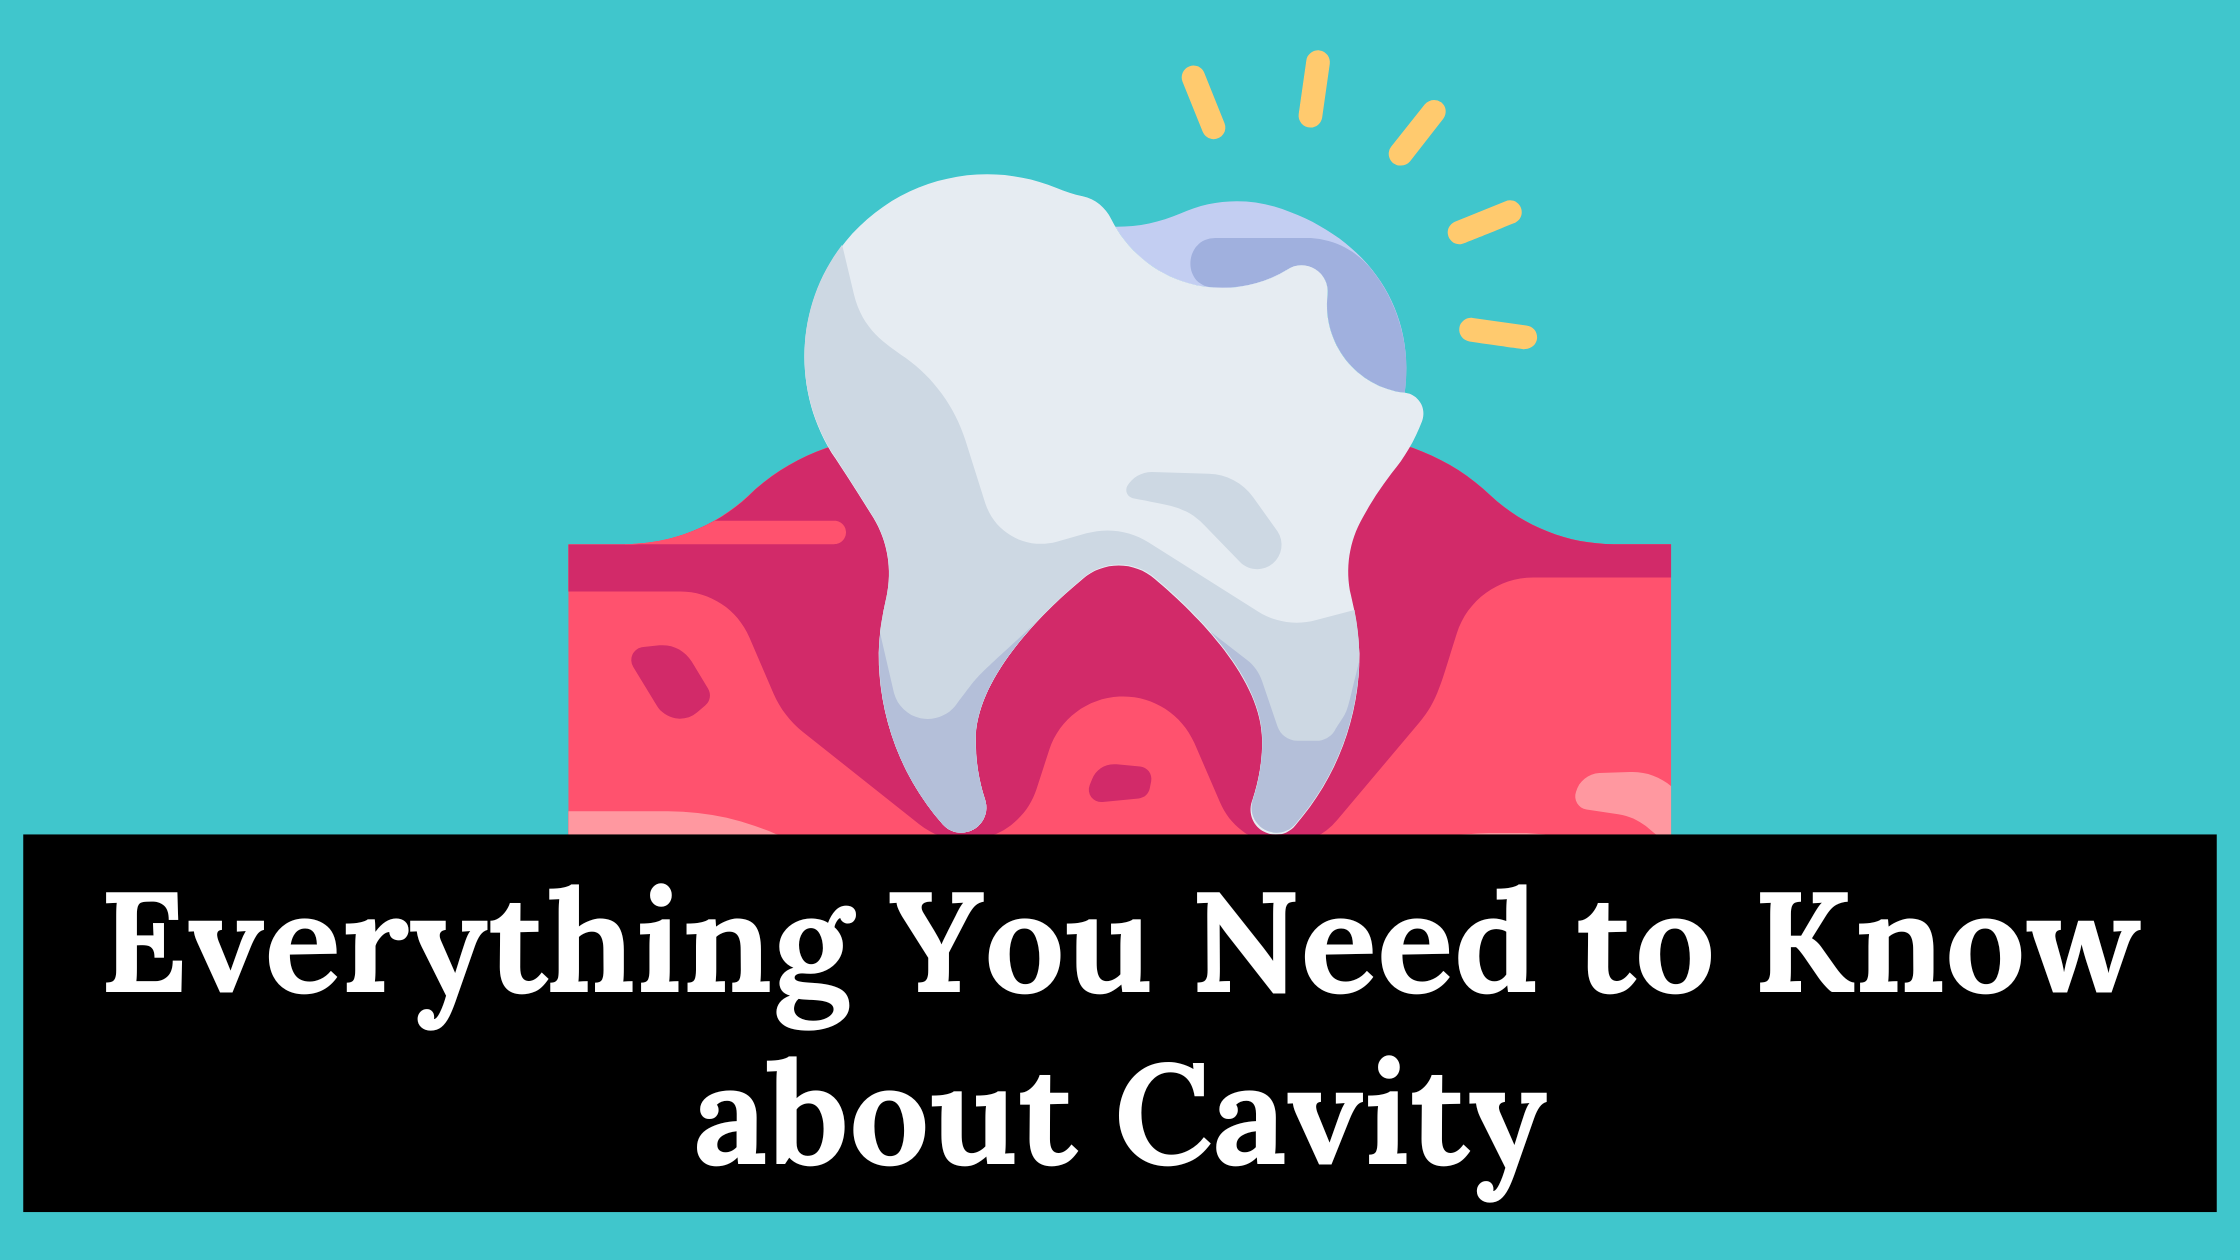 Everything You Need to Know about Cavity